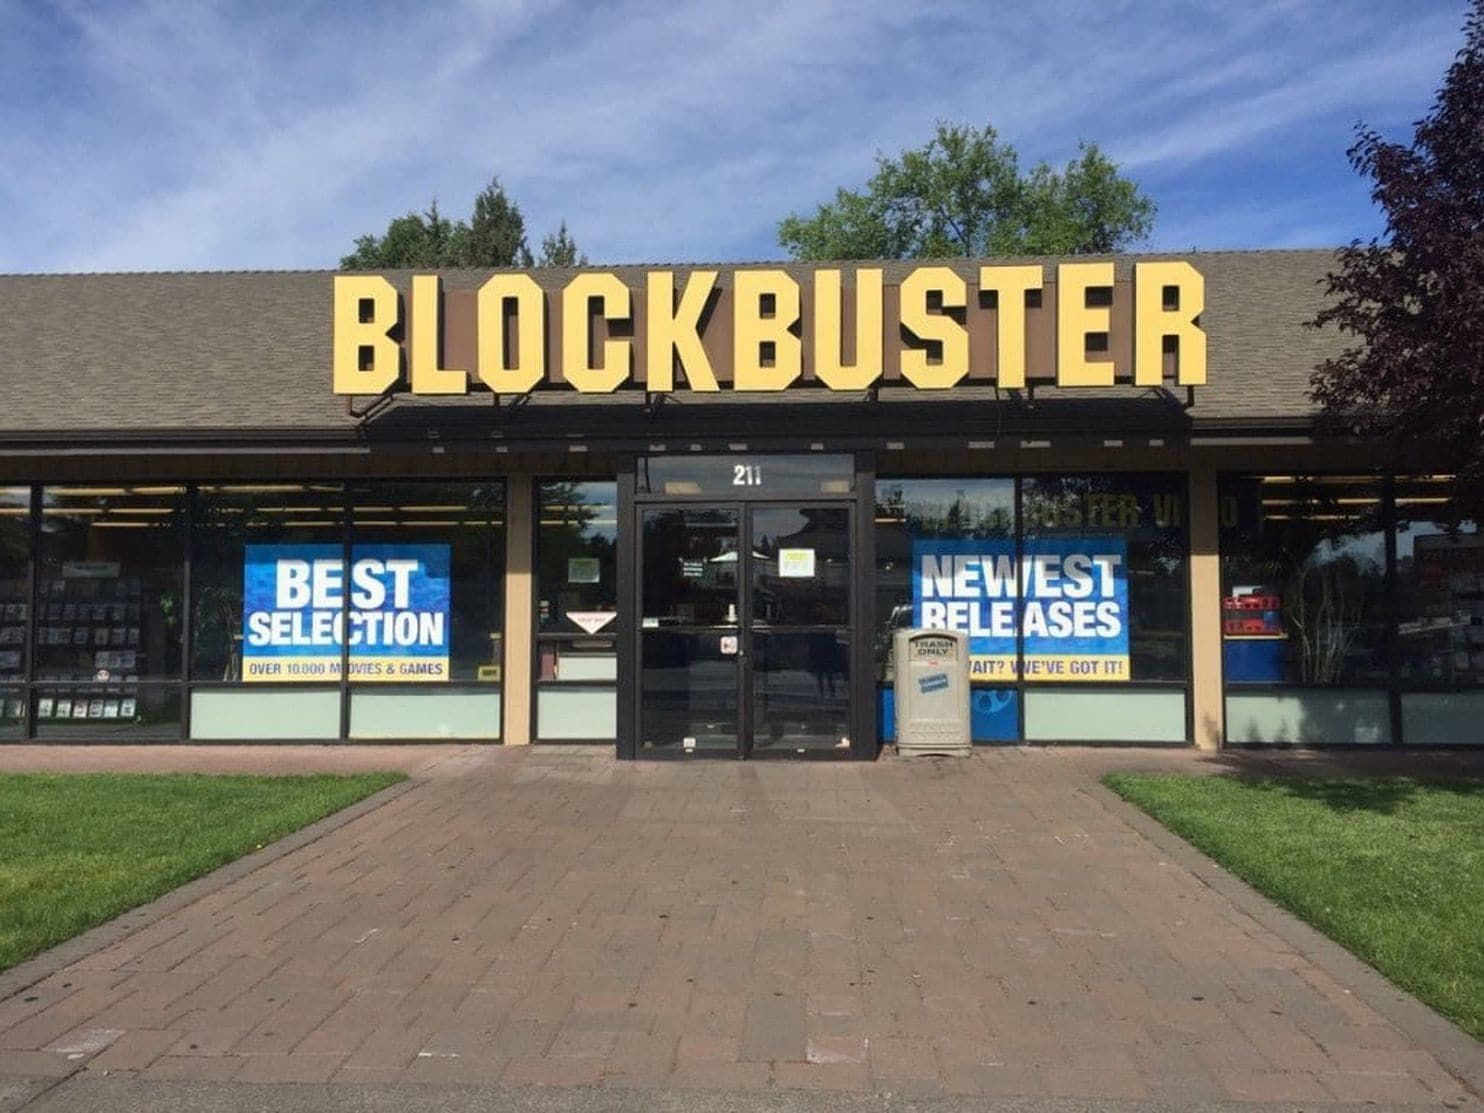 There's Now Only One Blockbuster Left, But It Refuses To Give Up